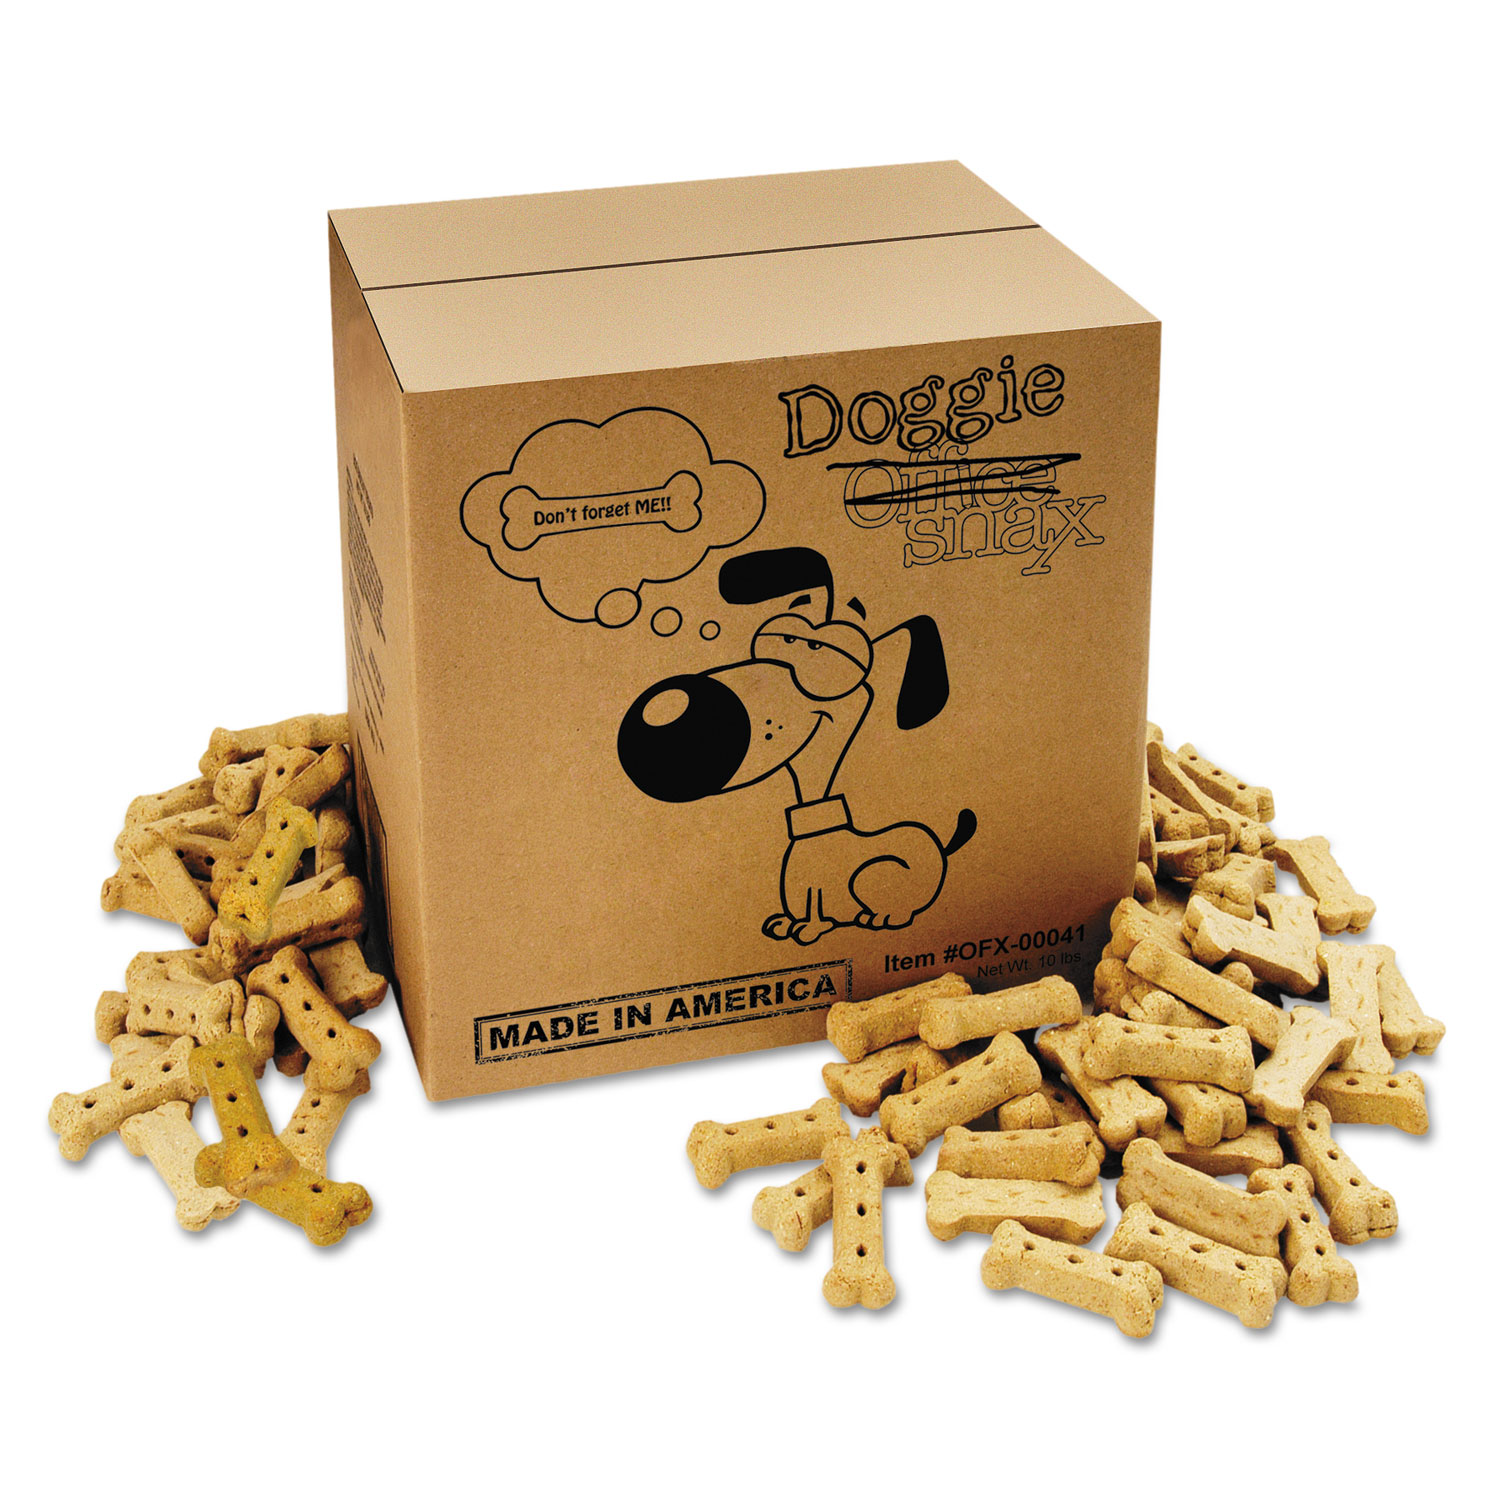  Office Snax 00041 Doggie Biscuits, 10lb Box (OFX00041) 